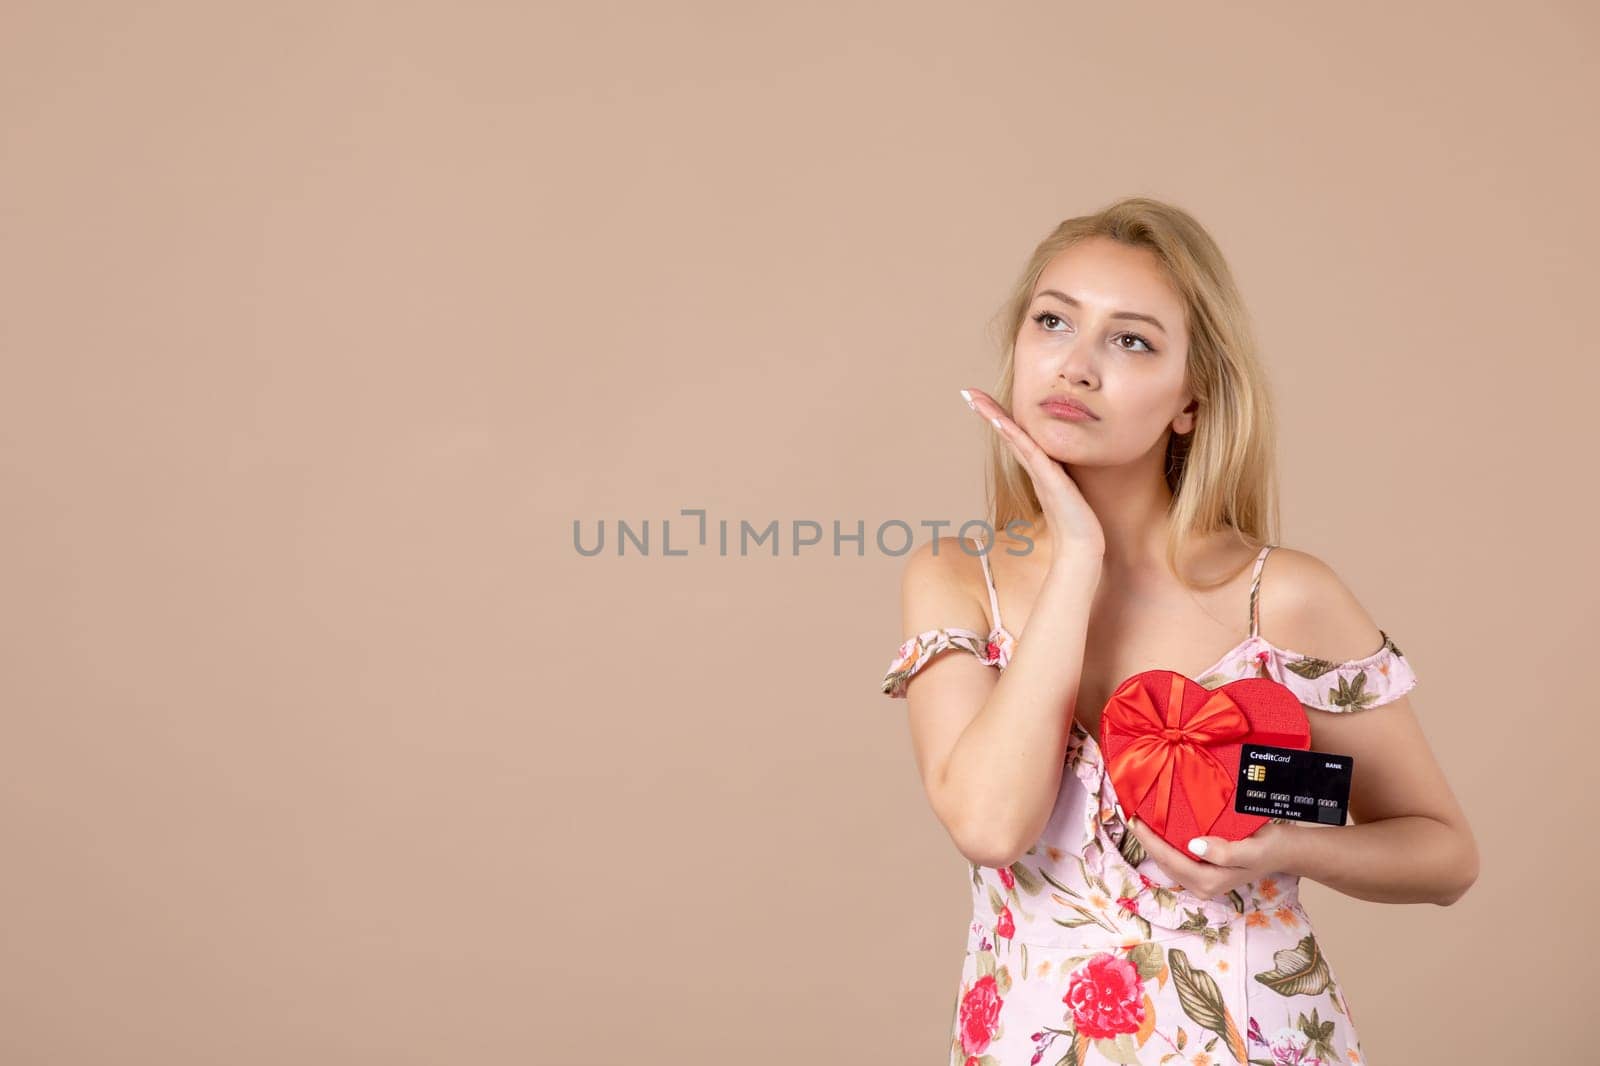 front view young female posing with red heart shaped present and bank card on brown background money march horizontal woman equality sensual